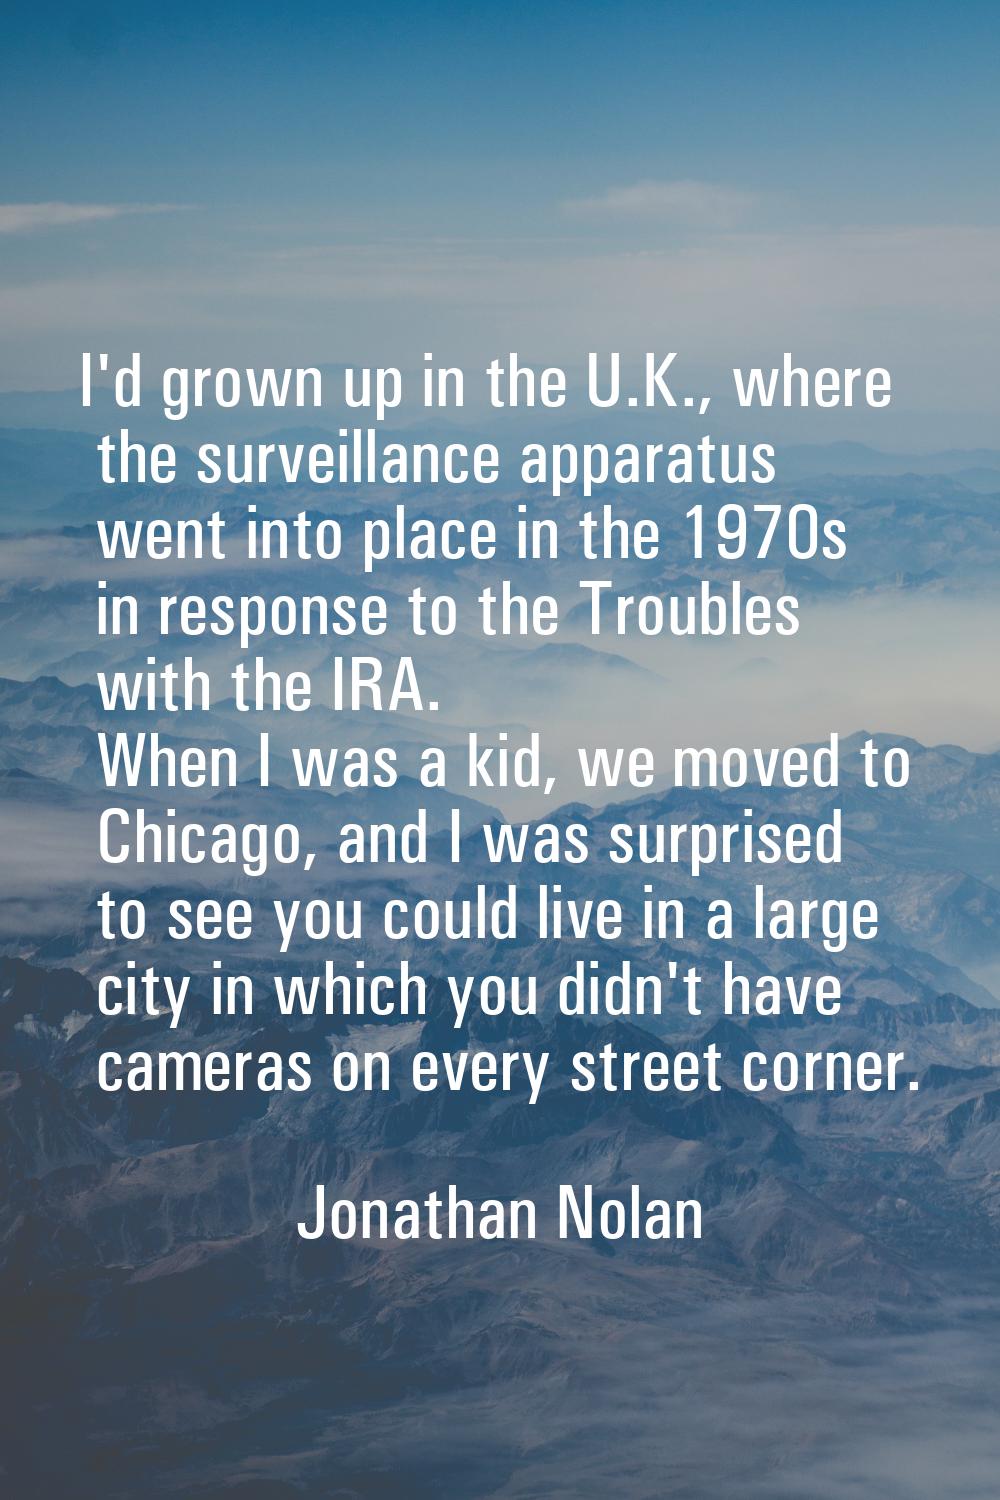 I'd grown up in the U.K., where the surveillance apparatus went into place in the 1970s in response